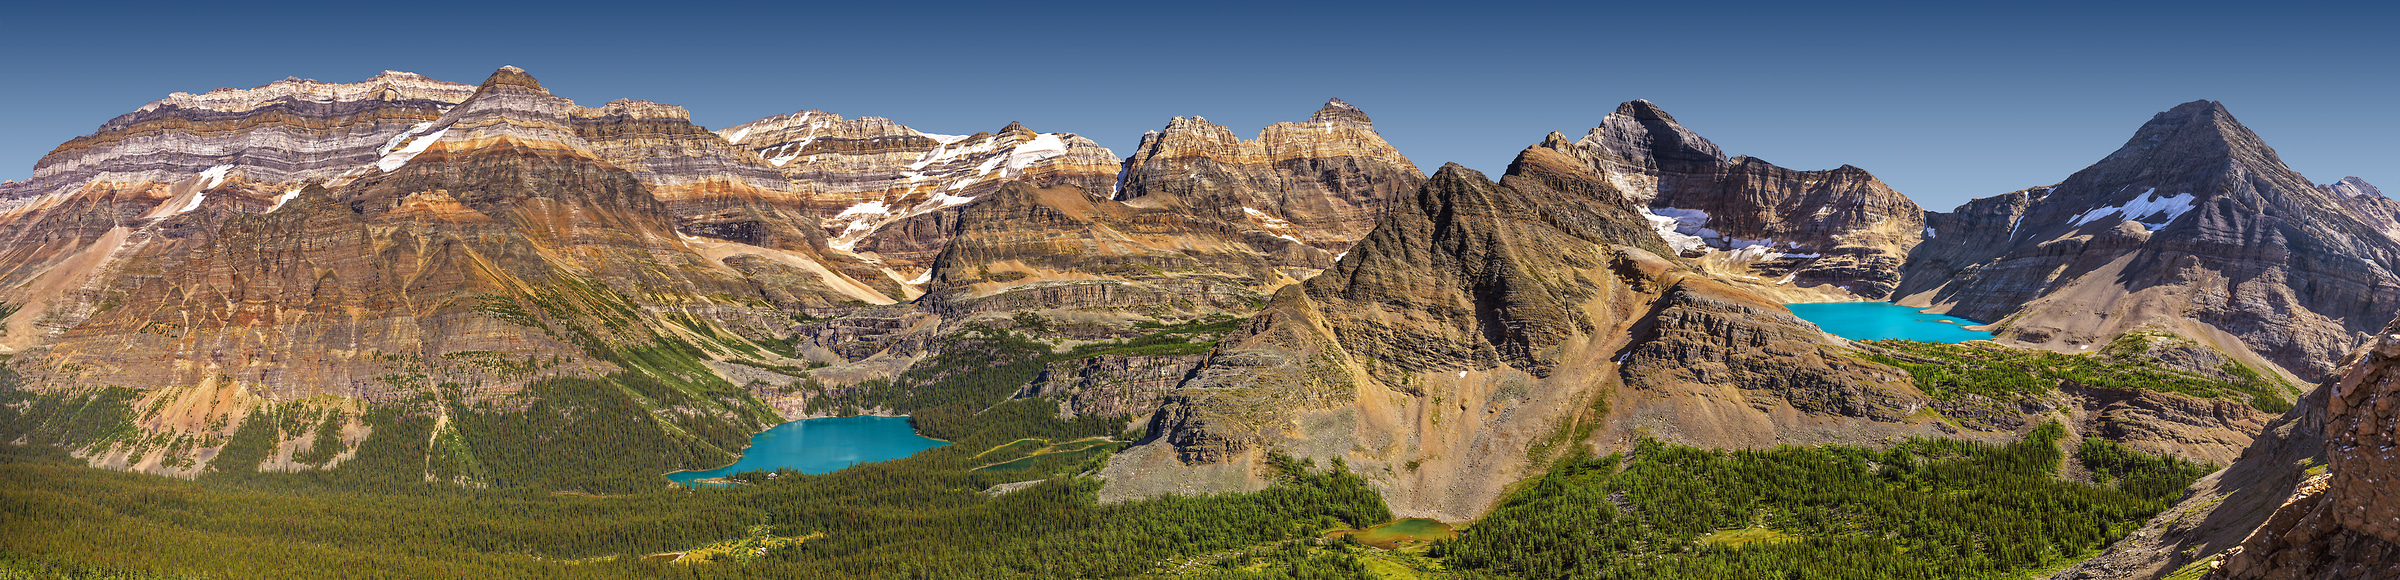 426 megapixels! A very high resolution, large-format VAST photo print of mountains and lakes; fine art landscape photo created by Chris Collacott in Yoho National Park, British Columbia, Canada